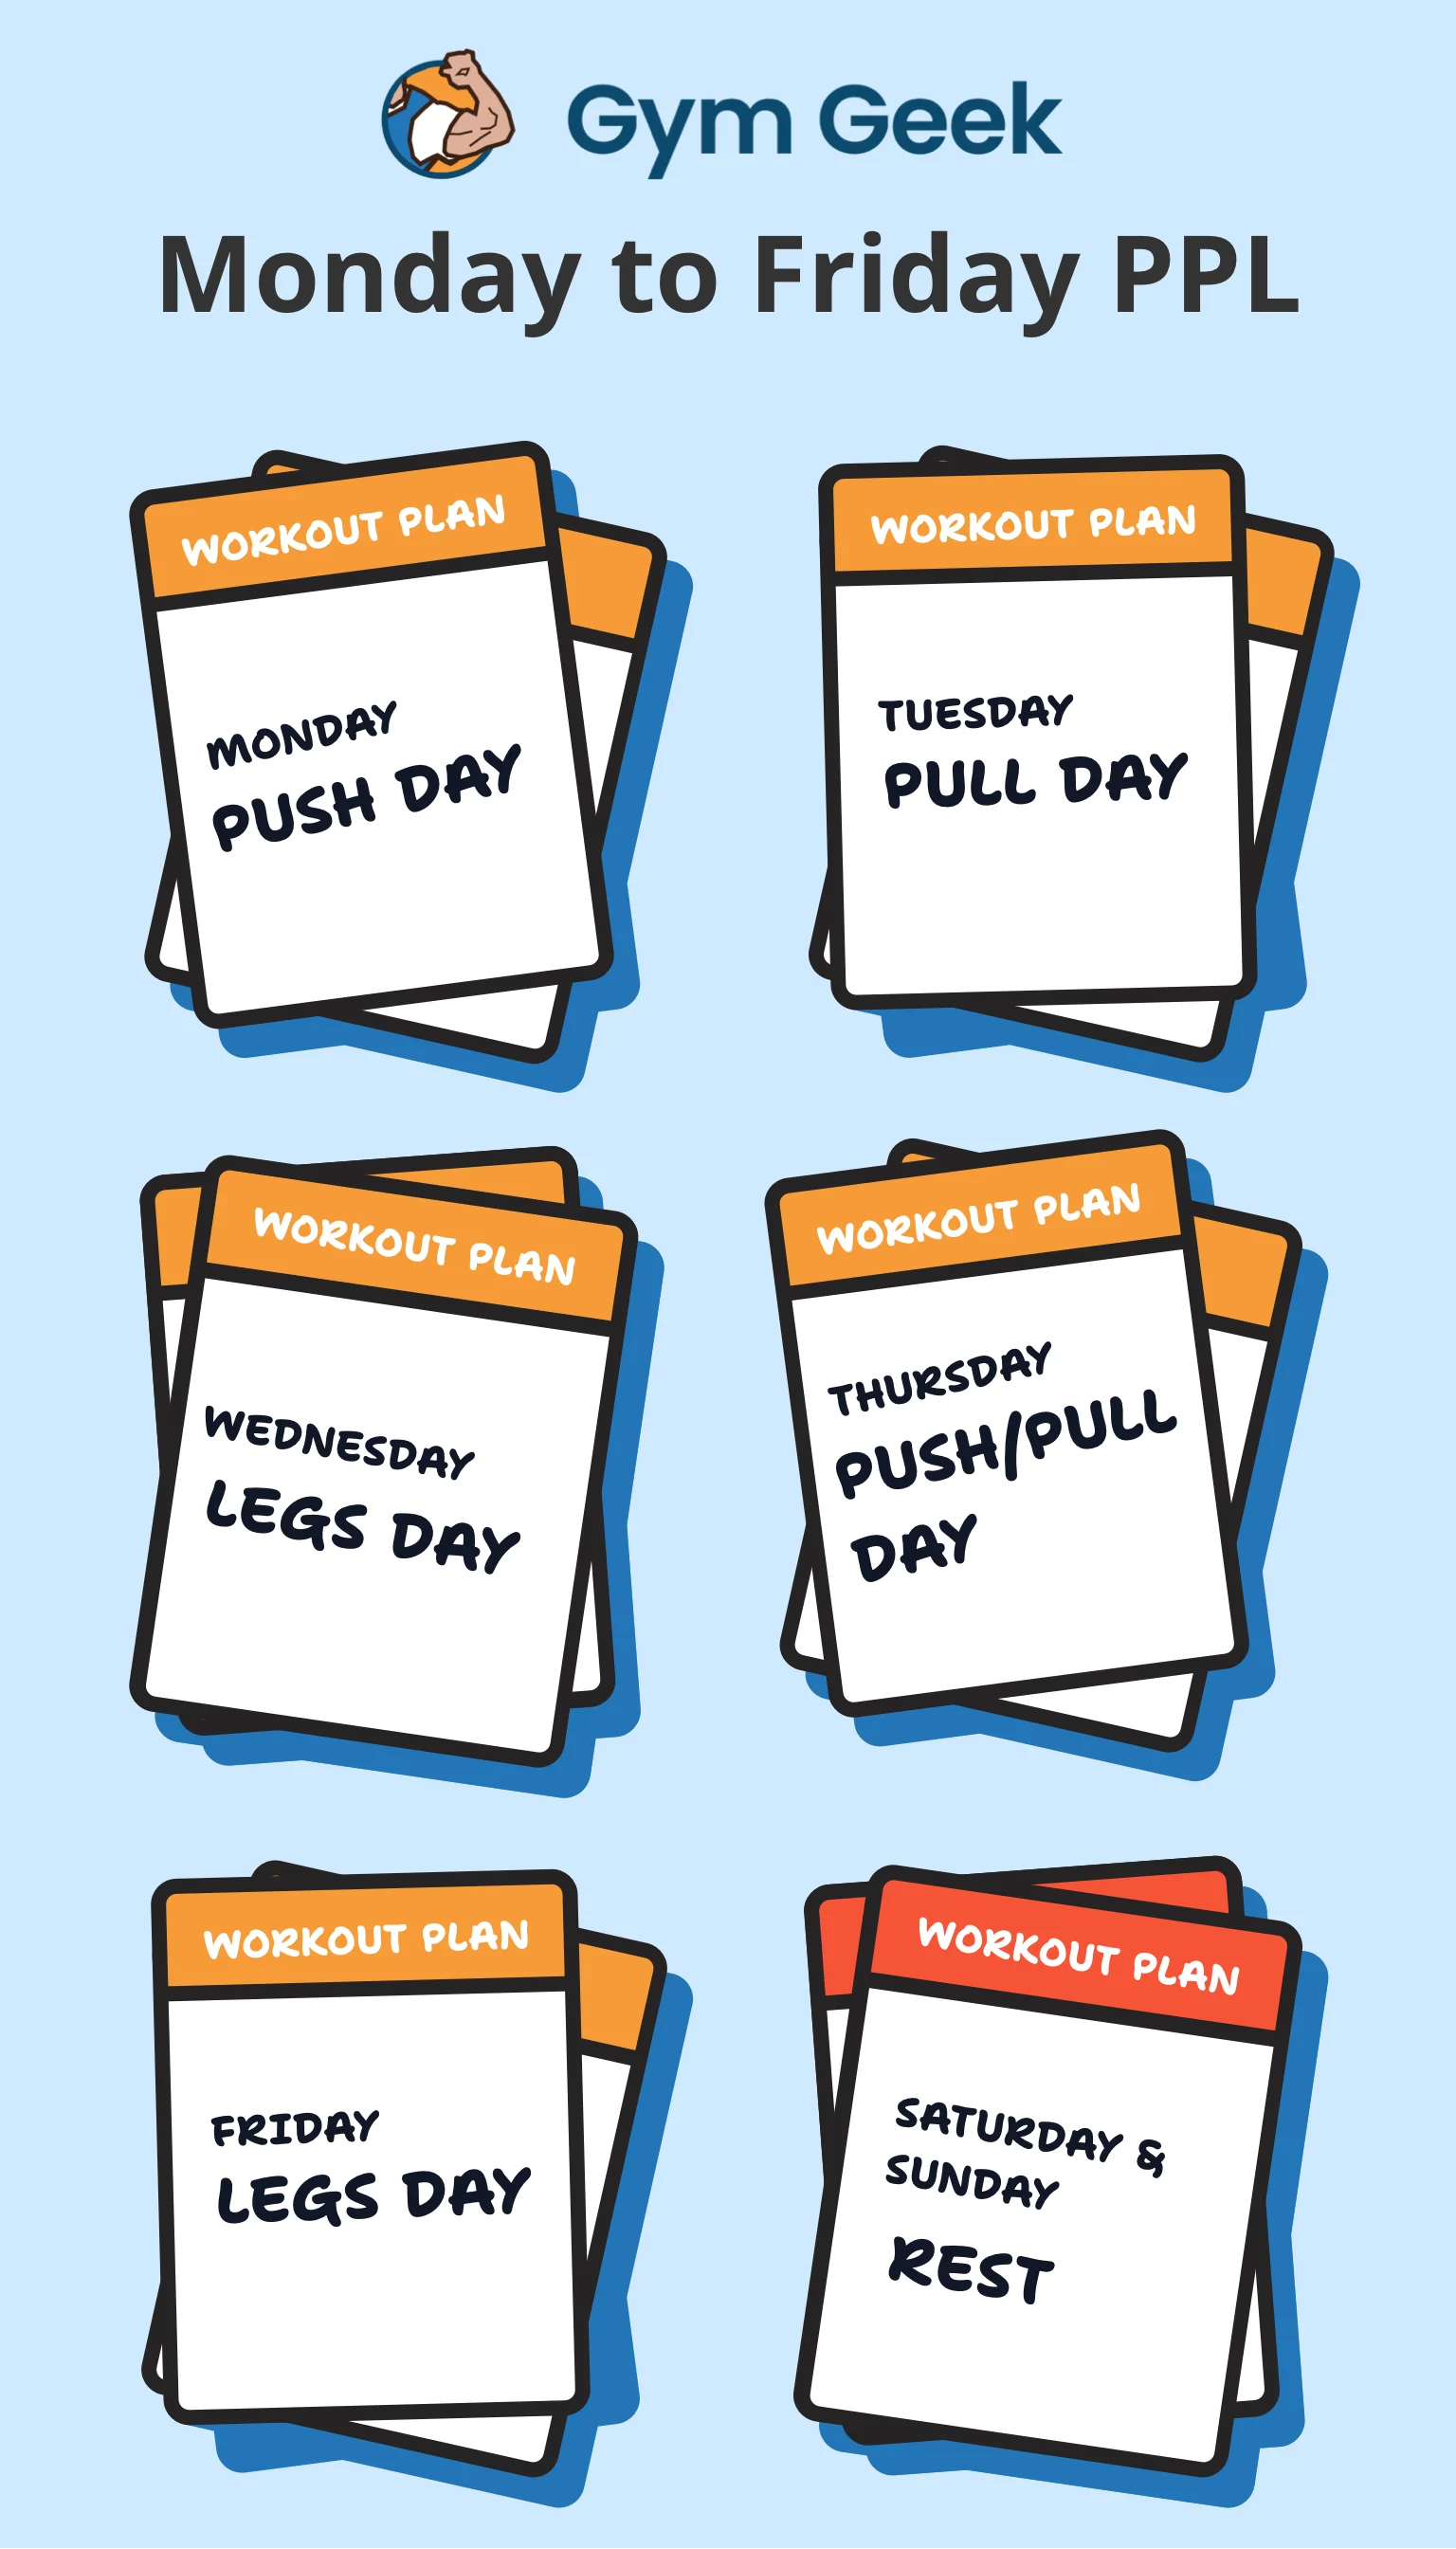 infographic - Weekly breakdown of Monday to Friday PPL split. Mondays are Push day, Tuesdays are Pull day, Wednesdays are Legs day, Thursdays are Push/Pull days, Fridays are Legs days, Saturday and Sunday are Rest days.